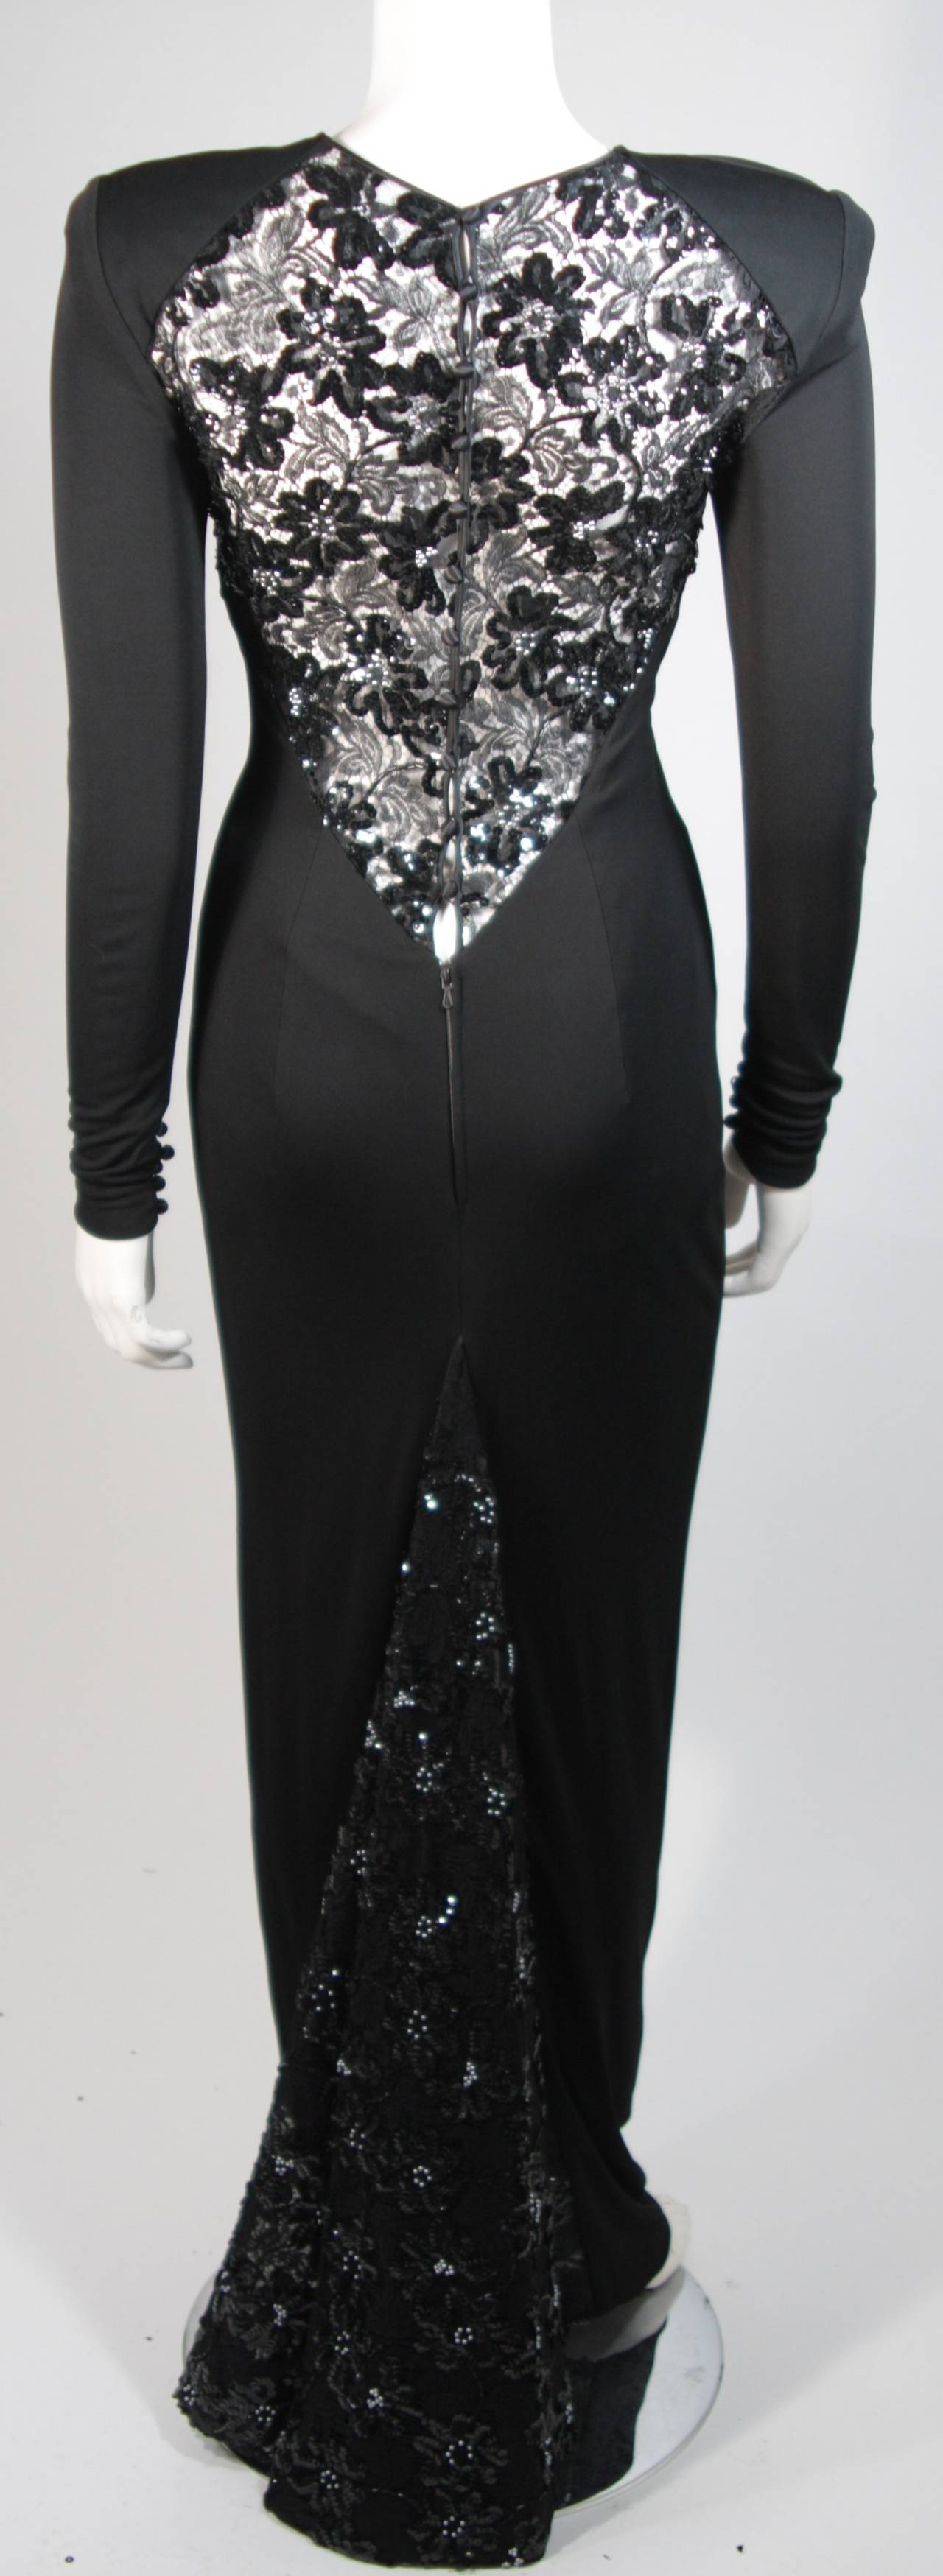 Vicky Tiel Black Jersey Gown with Sequin Lace Accents Size Small 4